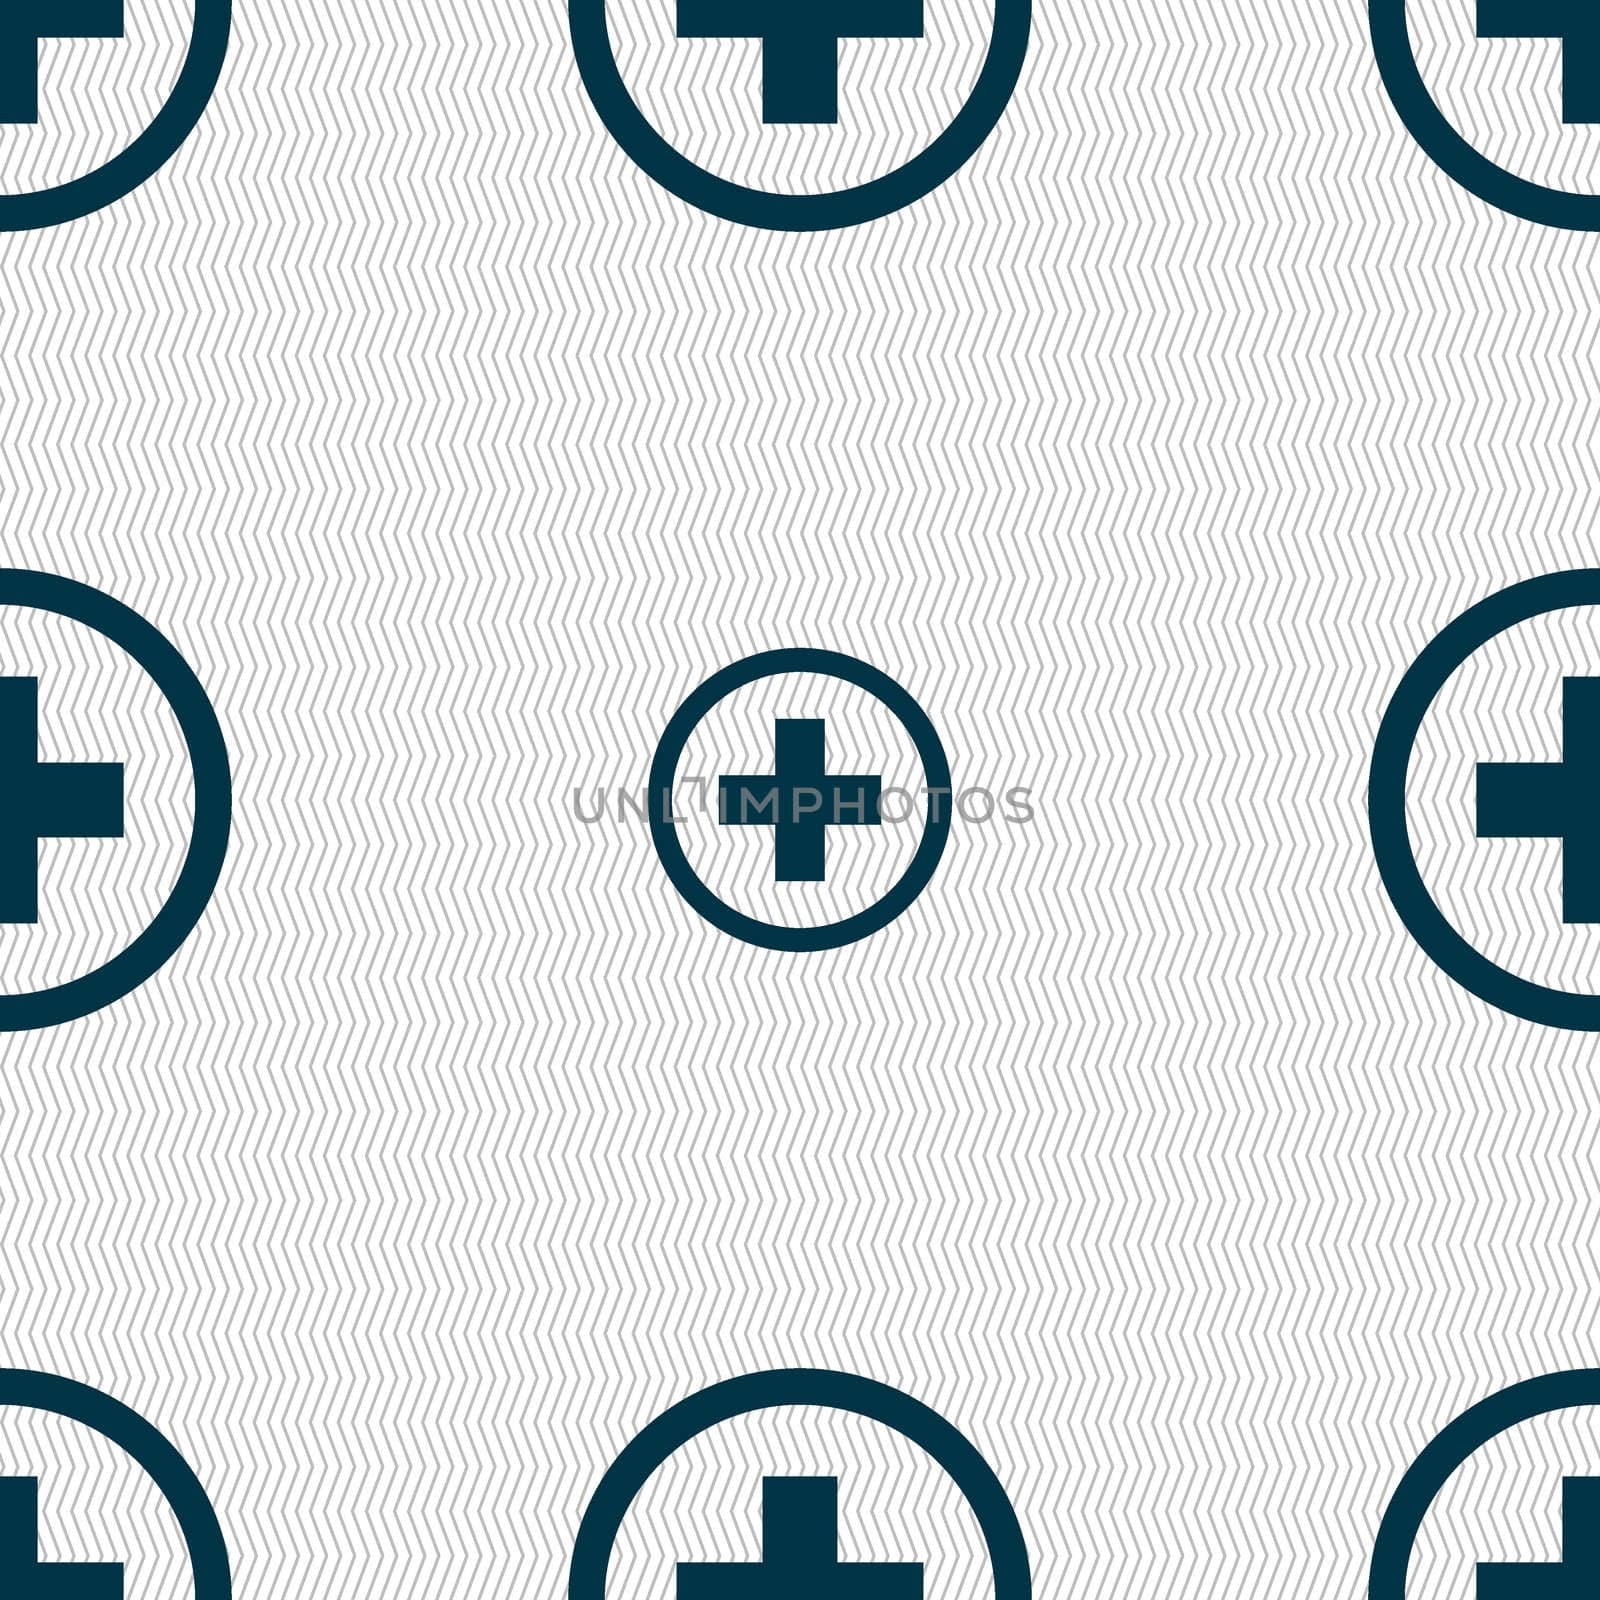 Plus sign icon. Positive symbol. Zoom in. Seamless abstract background with geometric shapes. illustration